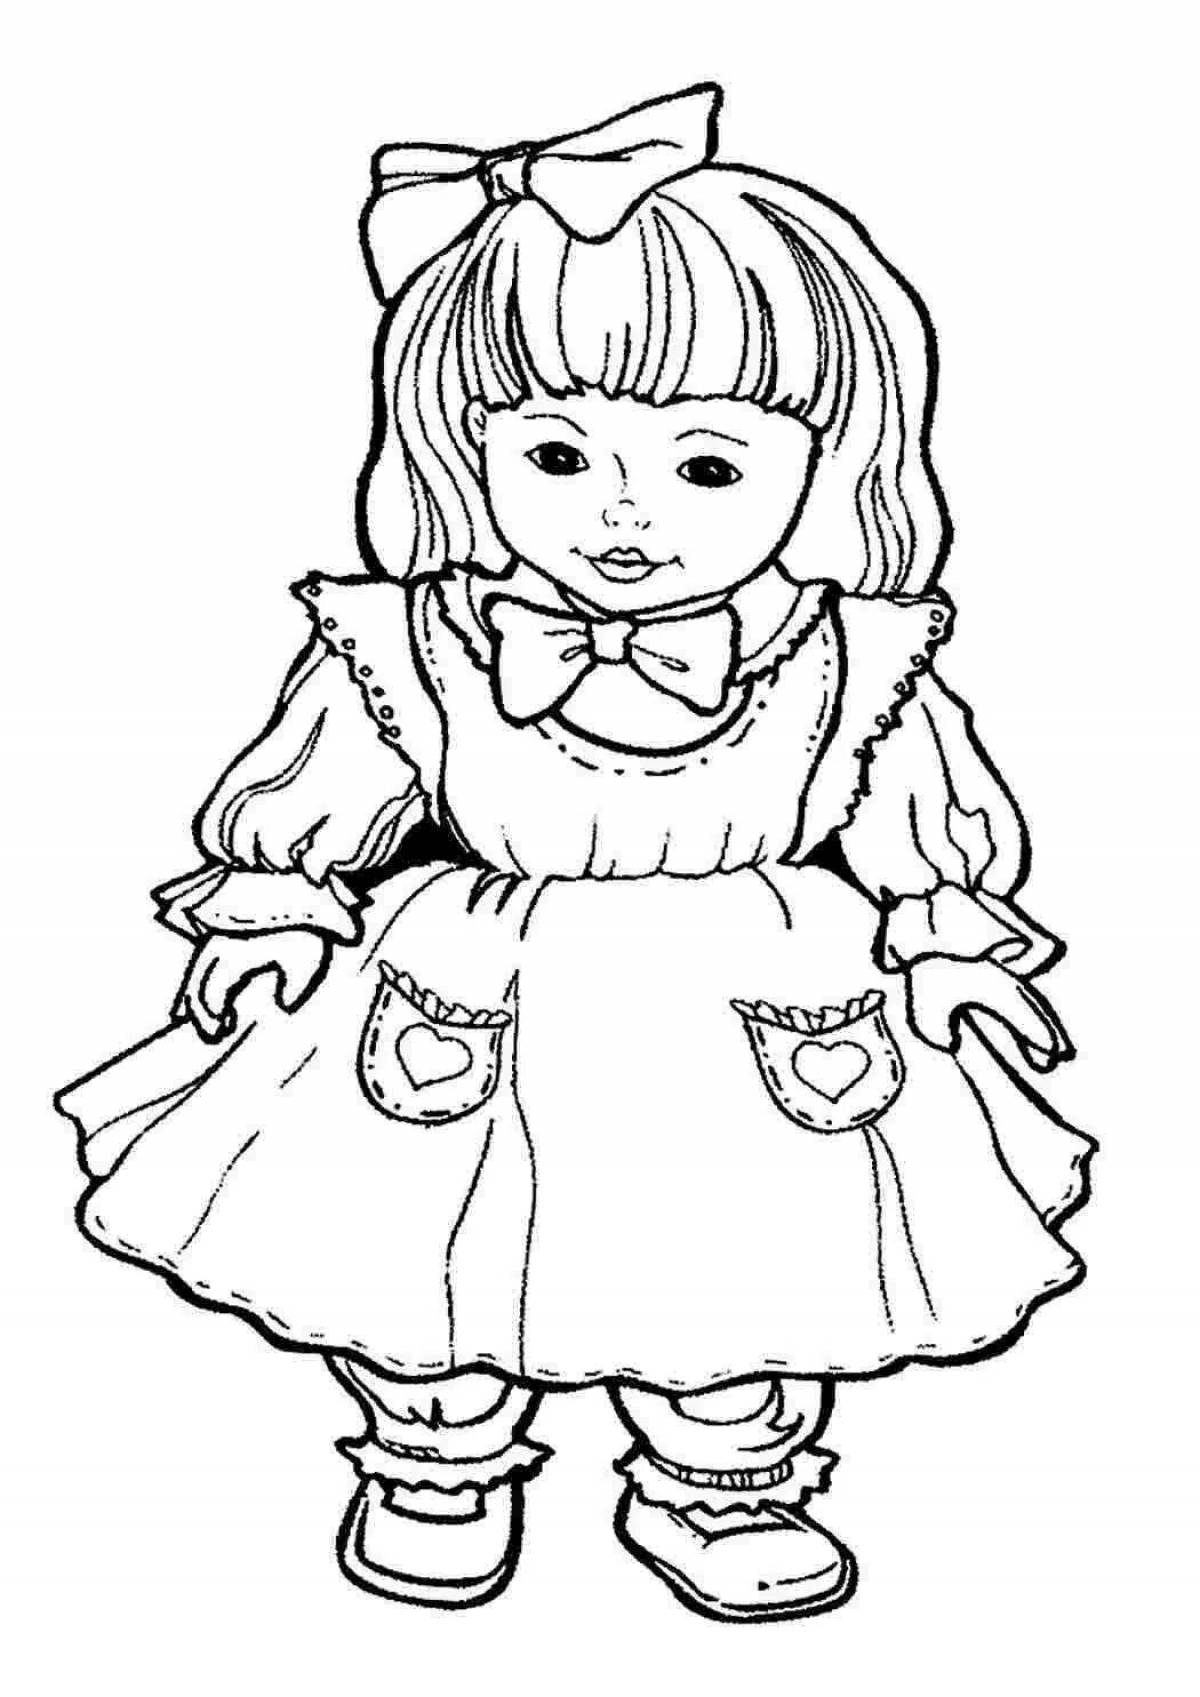 Cozy coloring pages for dolls